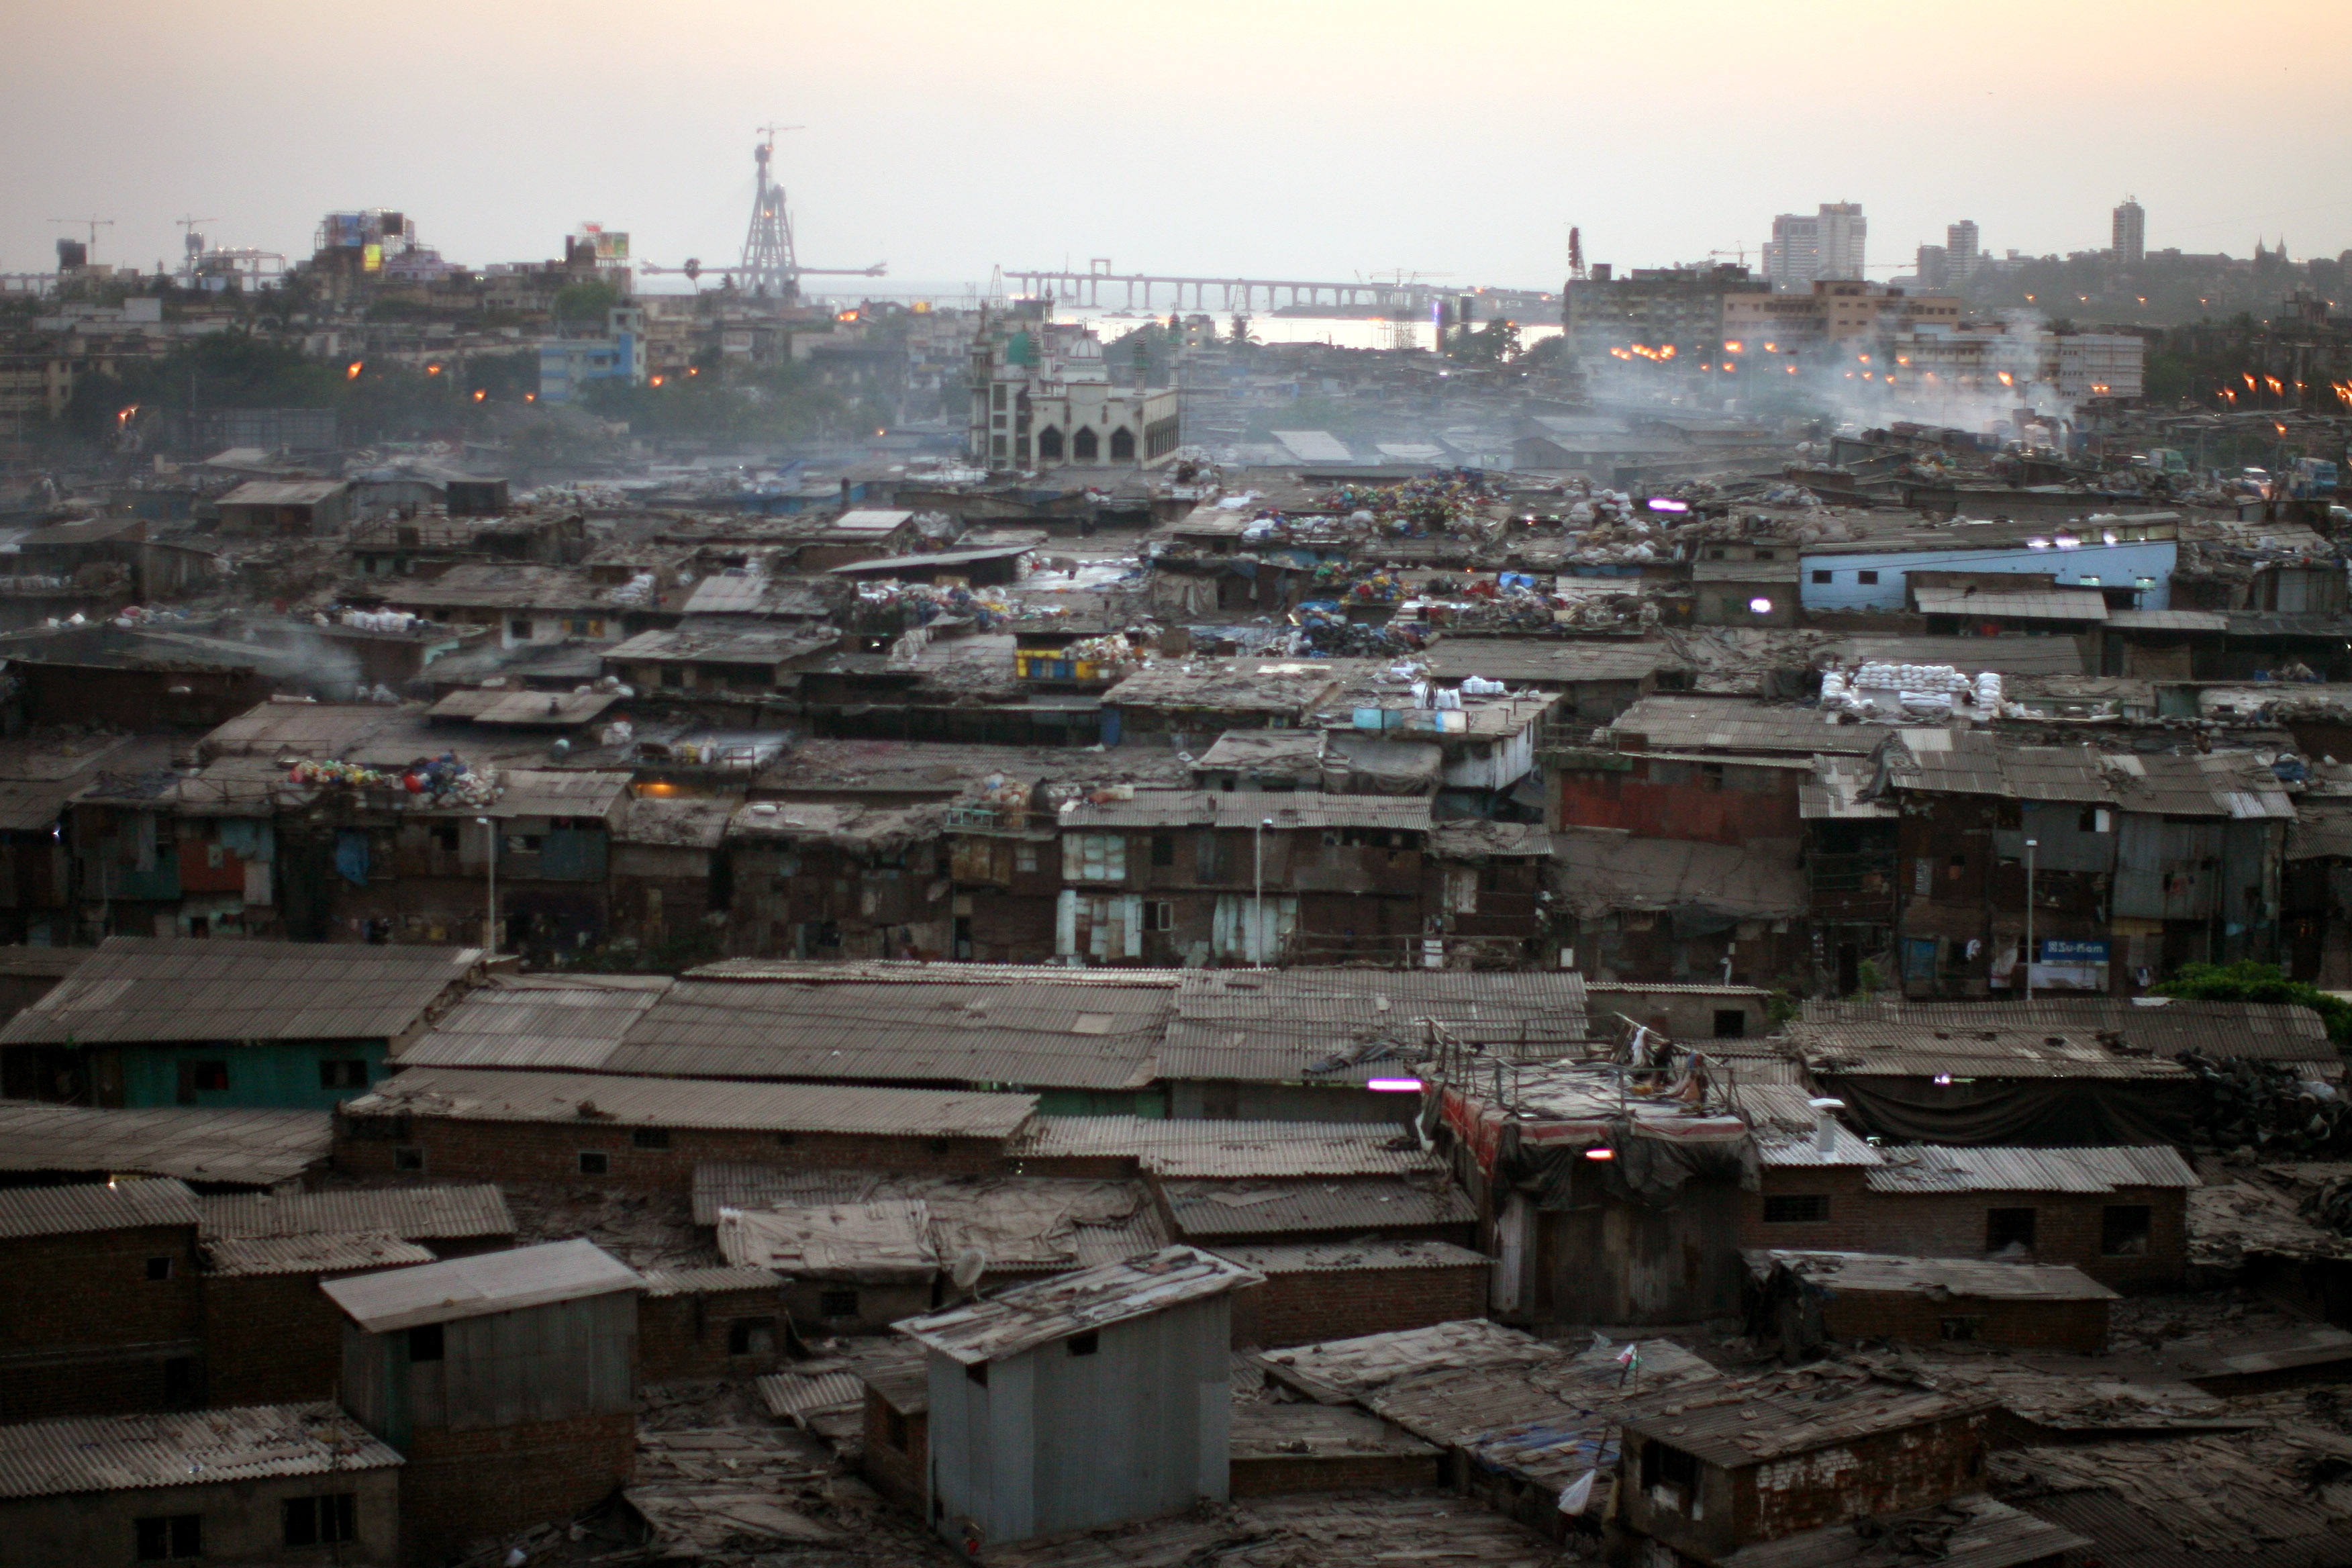 The slum is spread over roughly 620 acres (250 hectares) of potentially prime real estate in the financial capital, which is home to more than 20 million people.&nbsp;